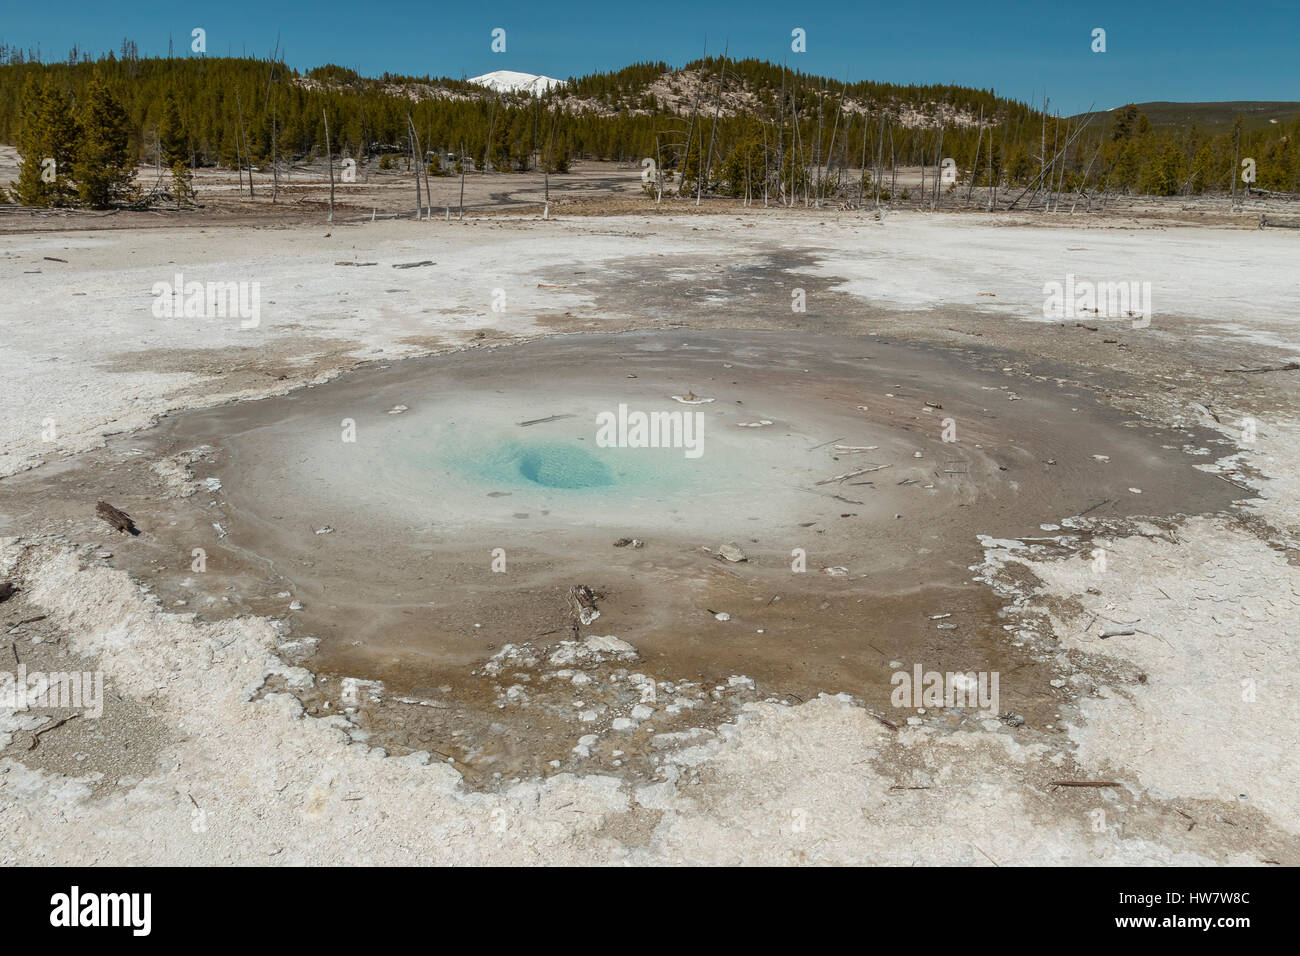 Pearl Geyser at Norris Geyser Basin in Yellowstone National Park, Wyoming. Stock Photo